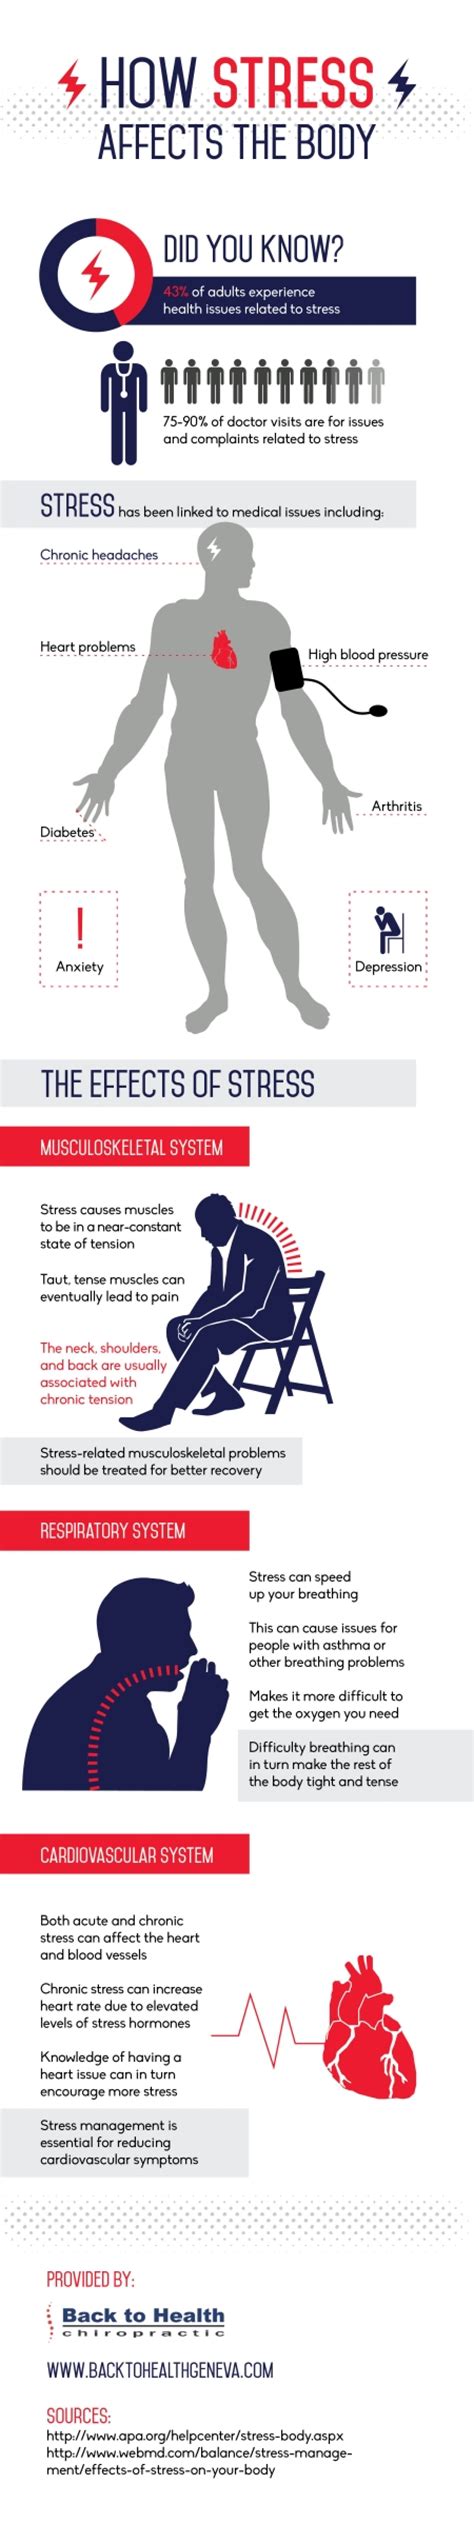 How Stress Affects the Body | Visual.ly